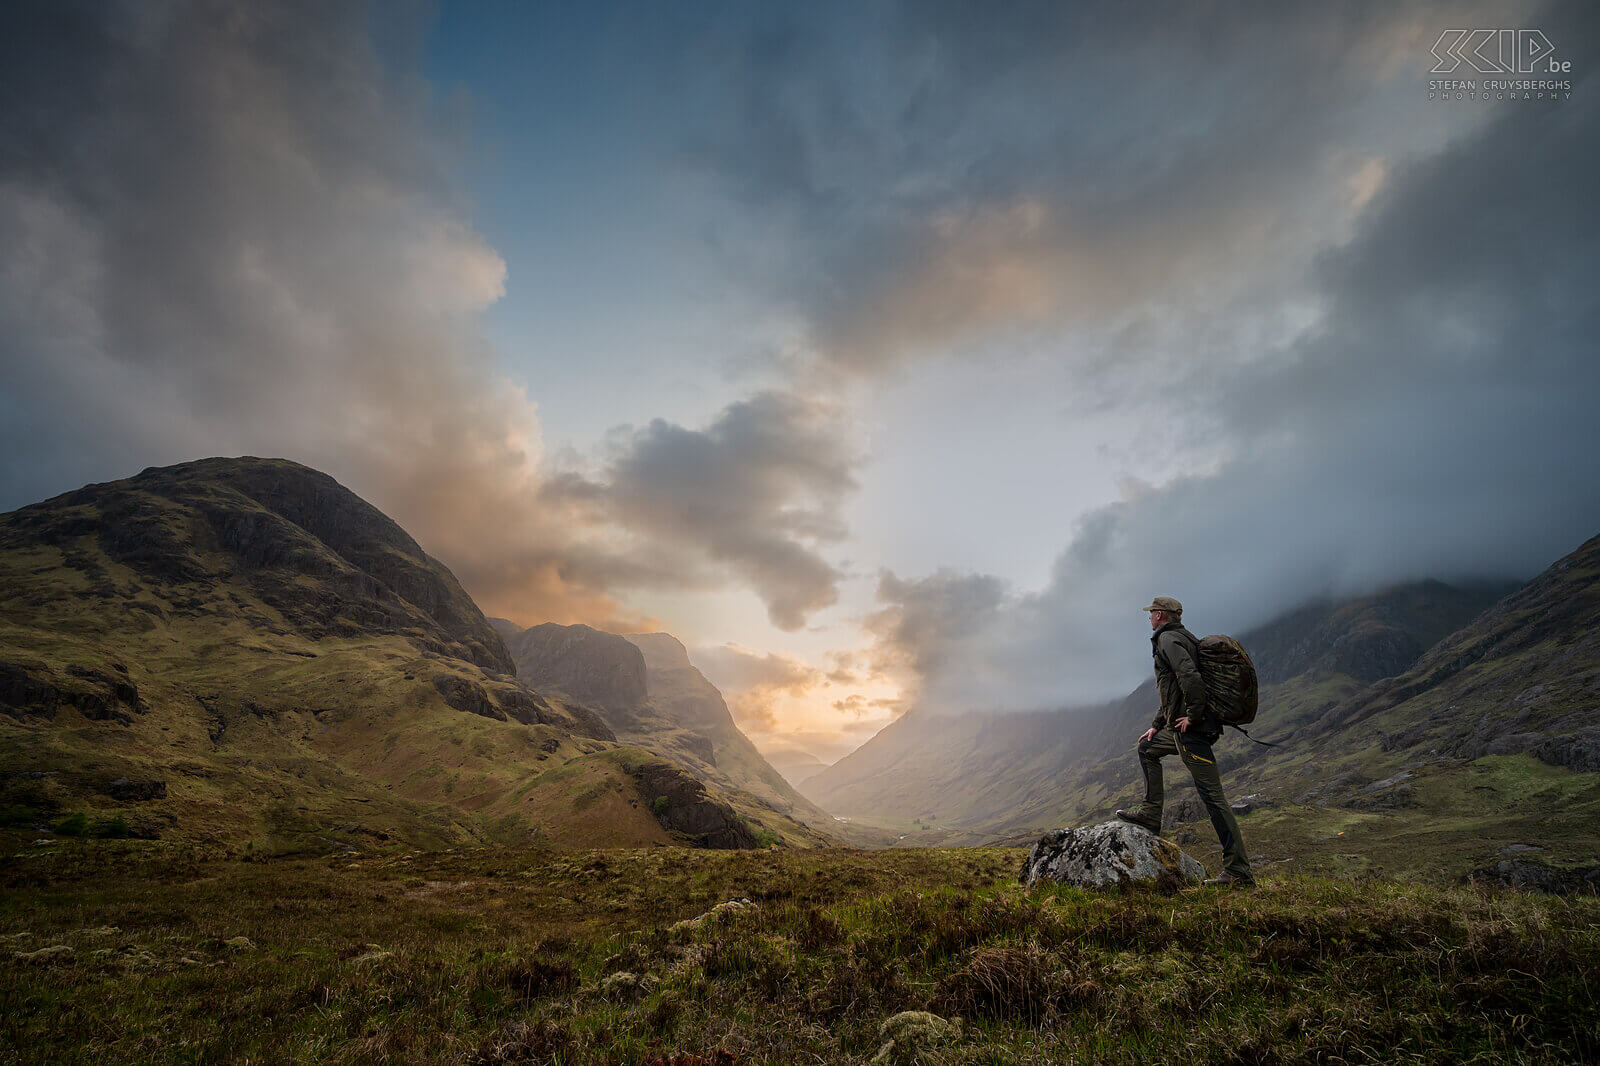 Glen Coe - Stefan Glen Coe is a breathtakingly beautiful valley surrounded by imposing mountains. The Glen Coe valley is named after the River Coe, which flows through this area. The low clouds and fog that often hang in this area contribute to the mysterious atmosphere. Stefan Cruysberghs